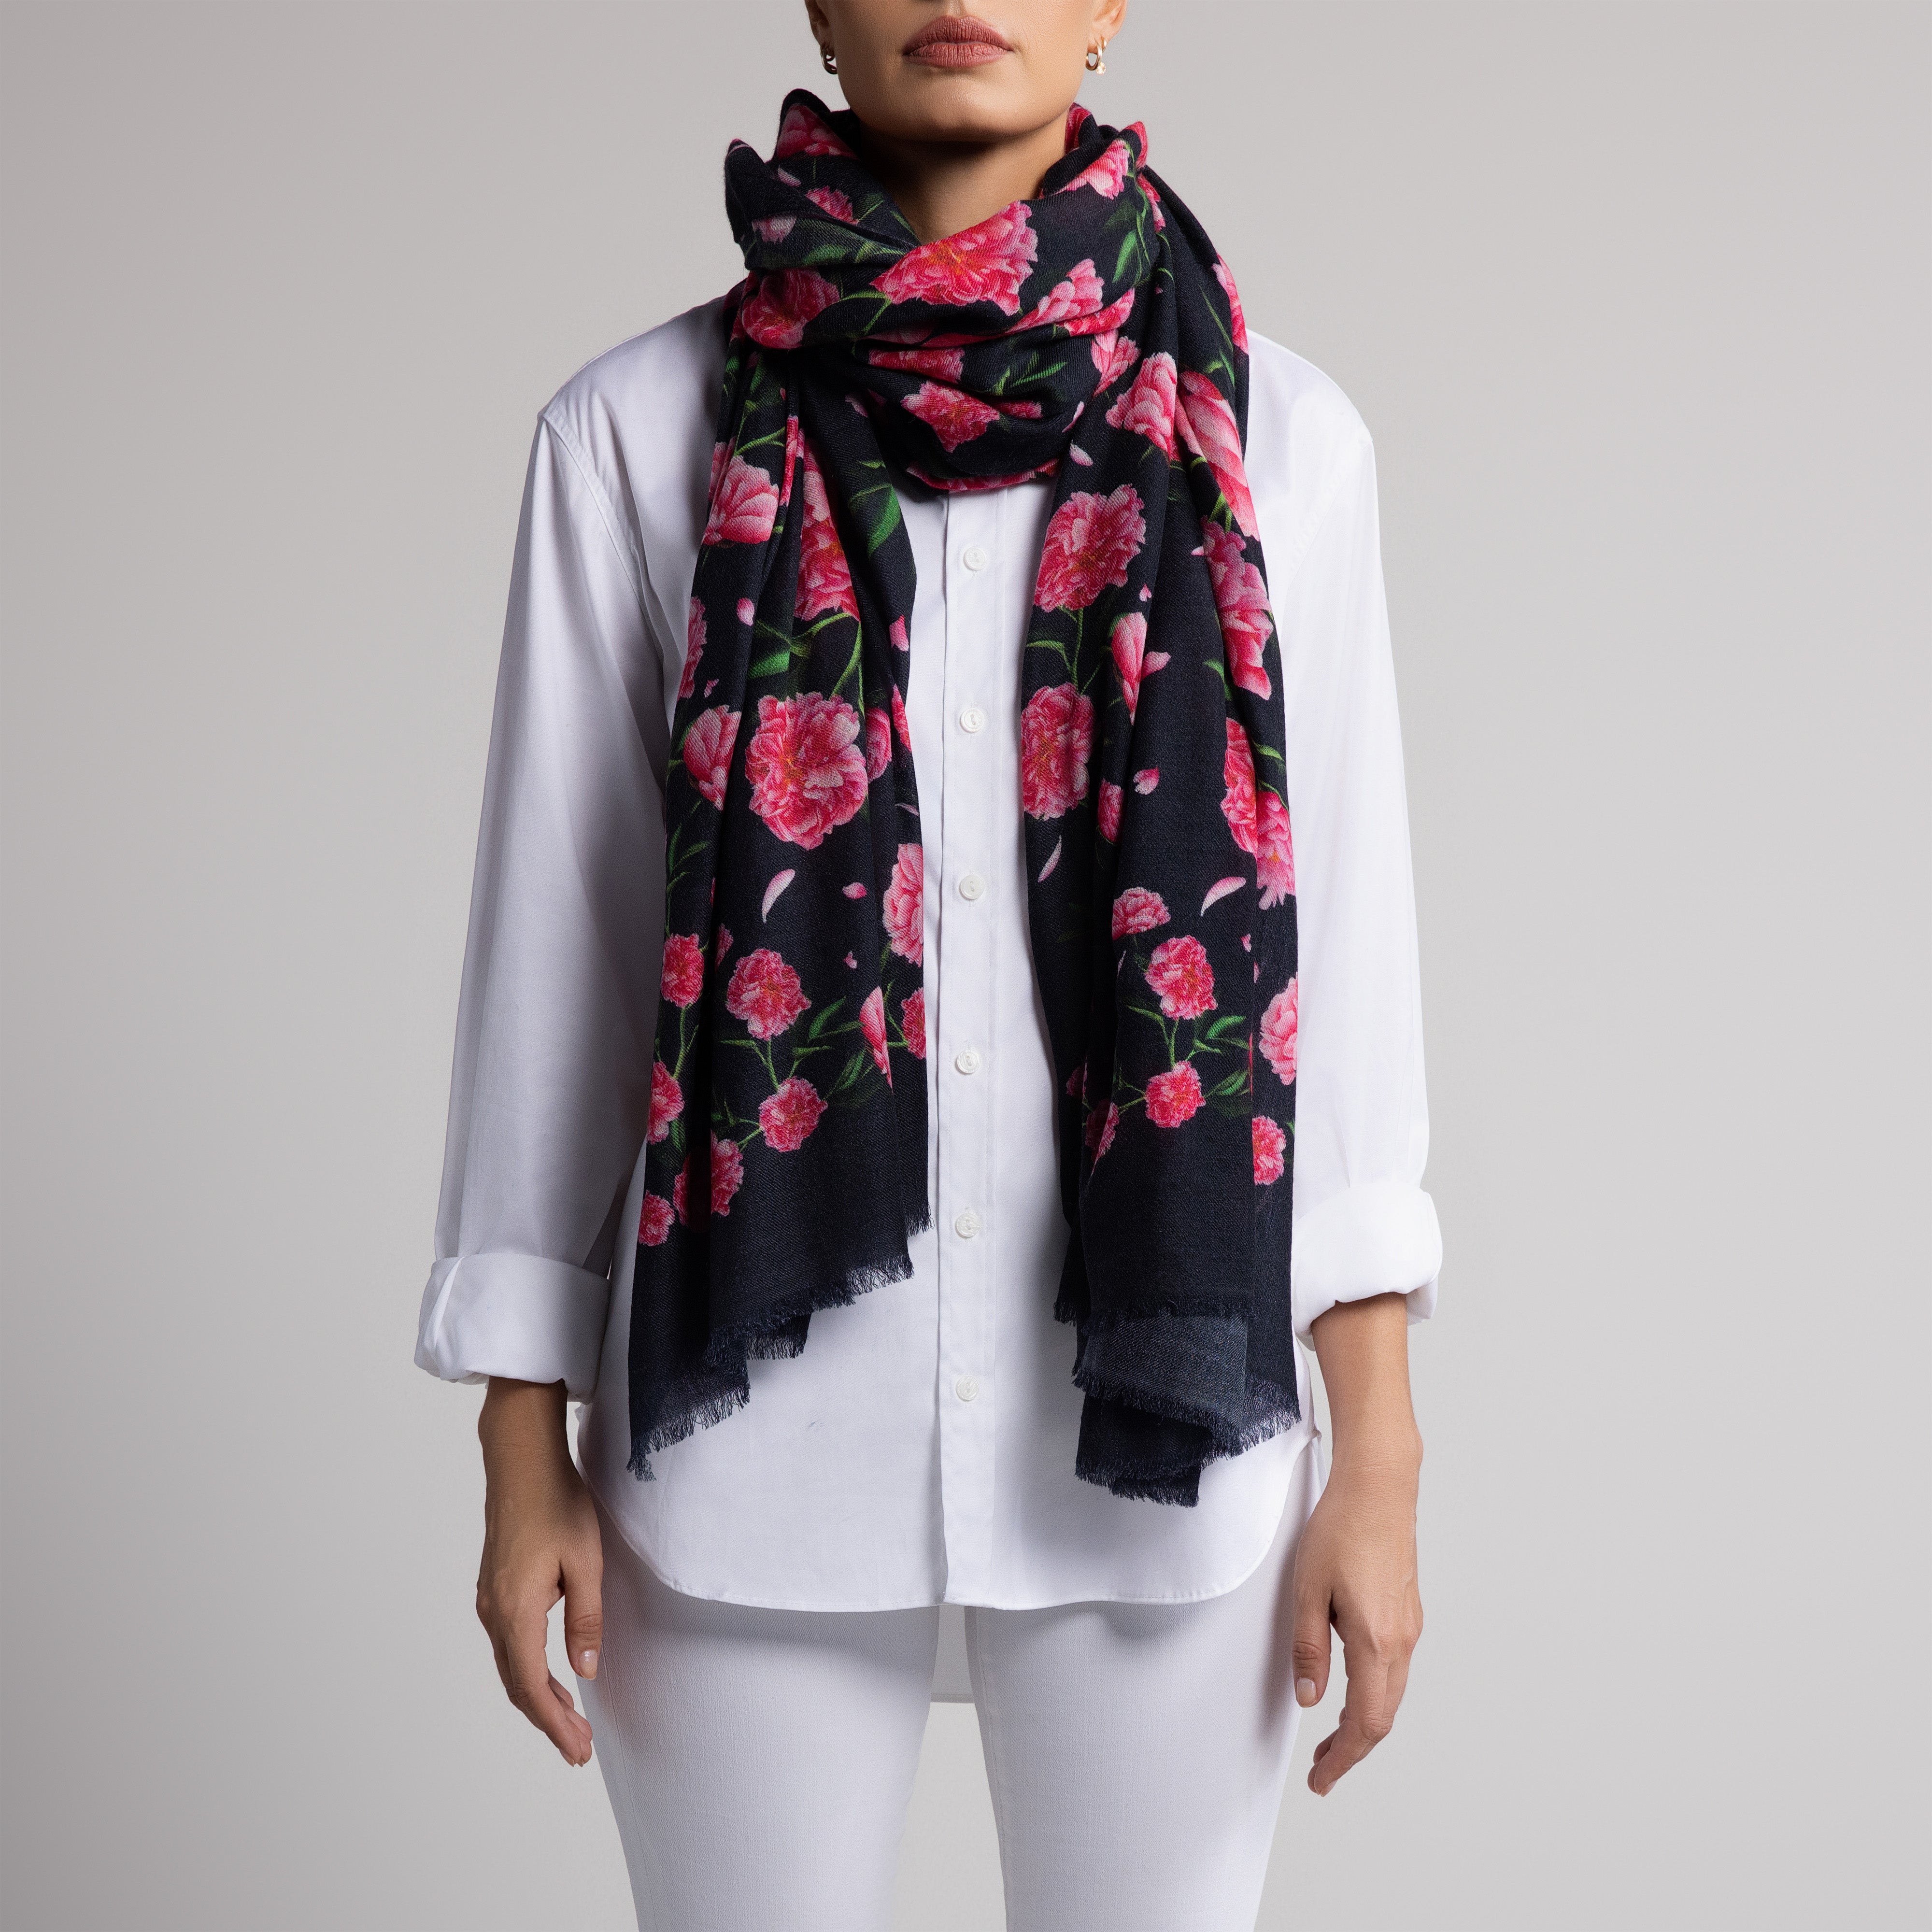 Peony 100% Cashmere Scarf in Black